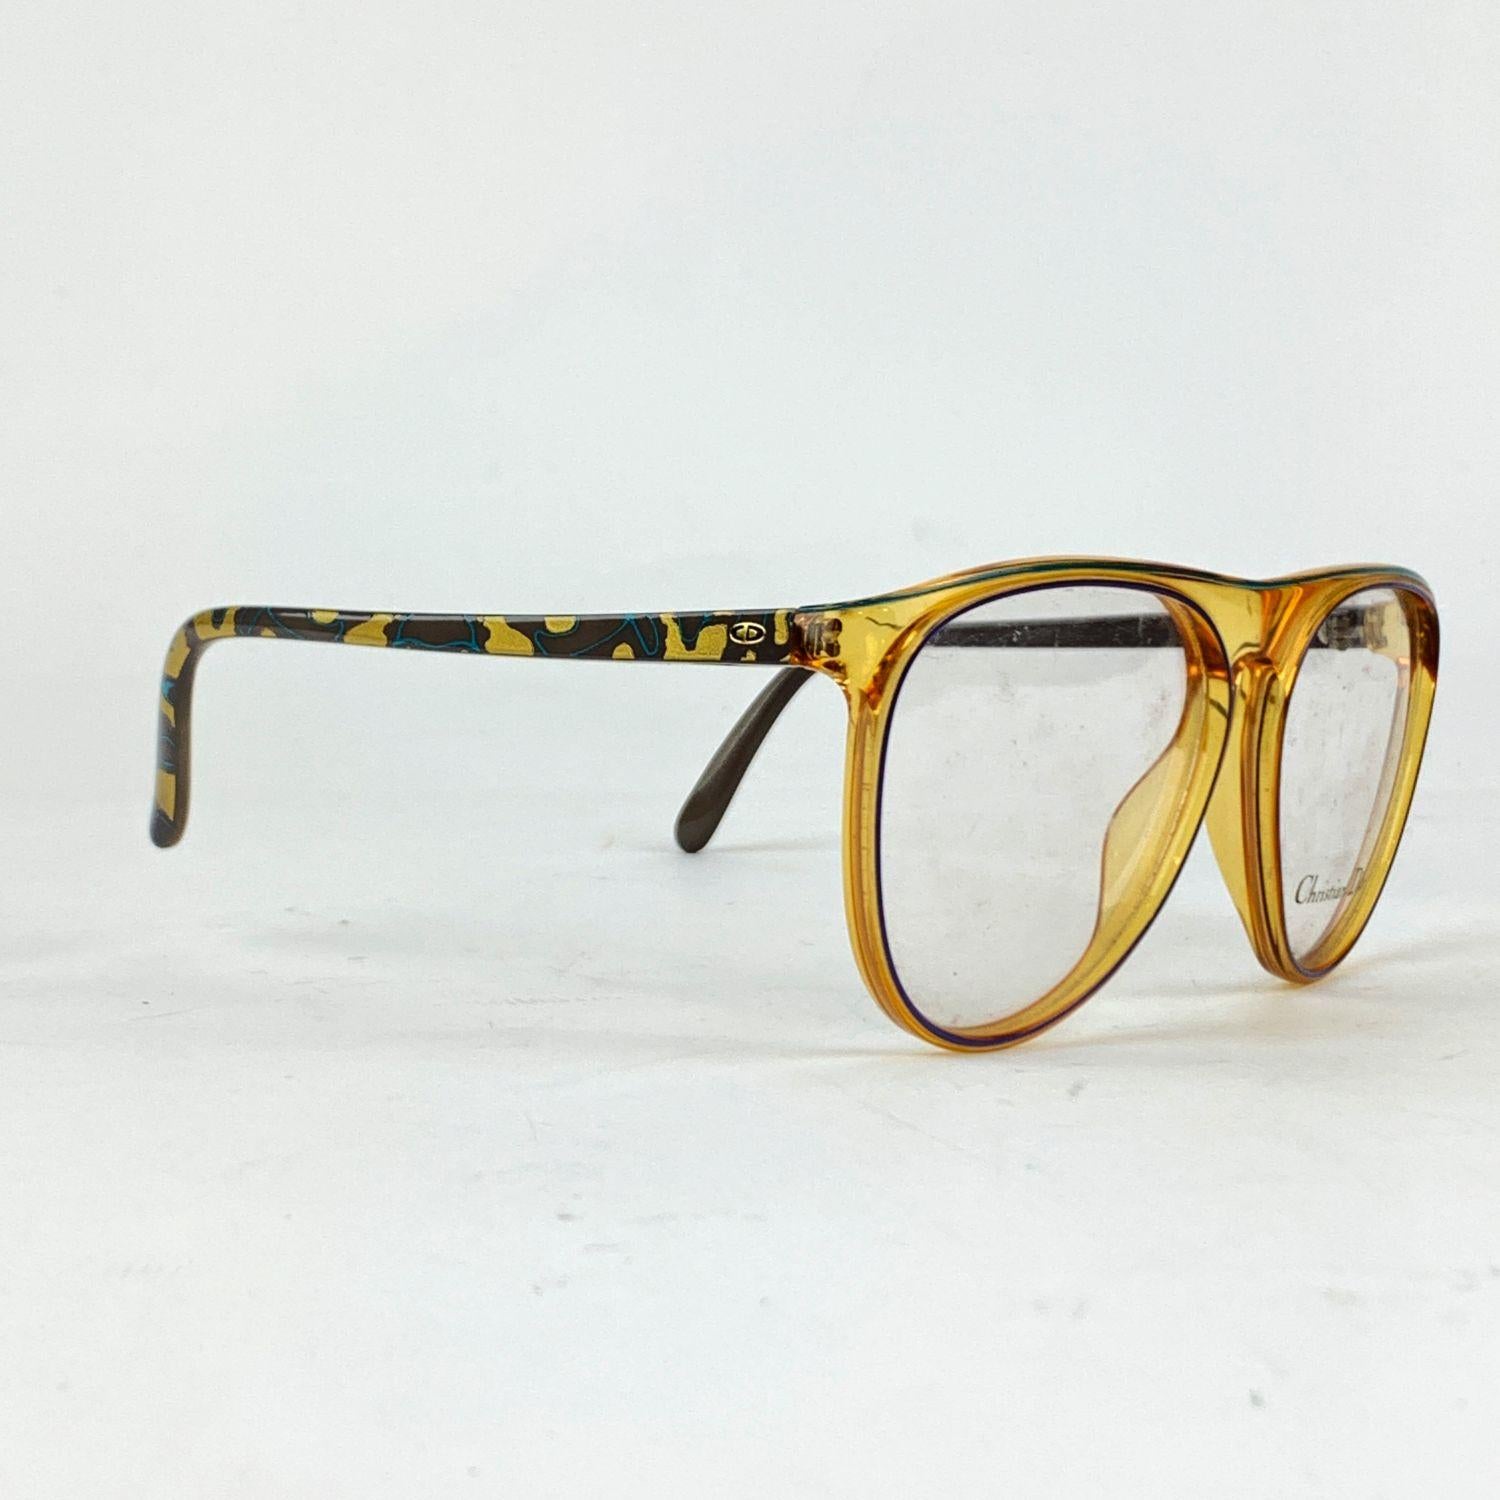 Vintage Eyeglasses by Christian Dior Mod. 2293, from the 90s. Made in Austria. Beige clear Optyl frame with grey camouflage ear stems. Clear DEMO lens, with Christian Dior signature. Model refs: Mod. 2293 - 50 - 57/13 - 125



Details

MATERIAL: